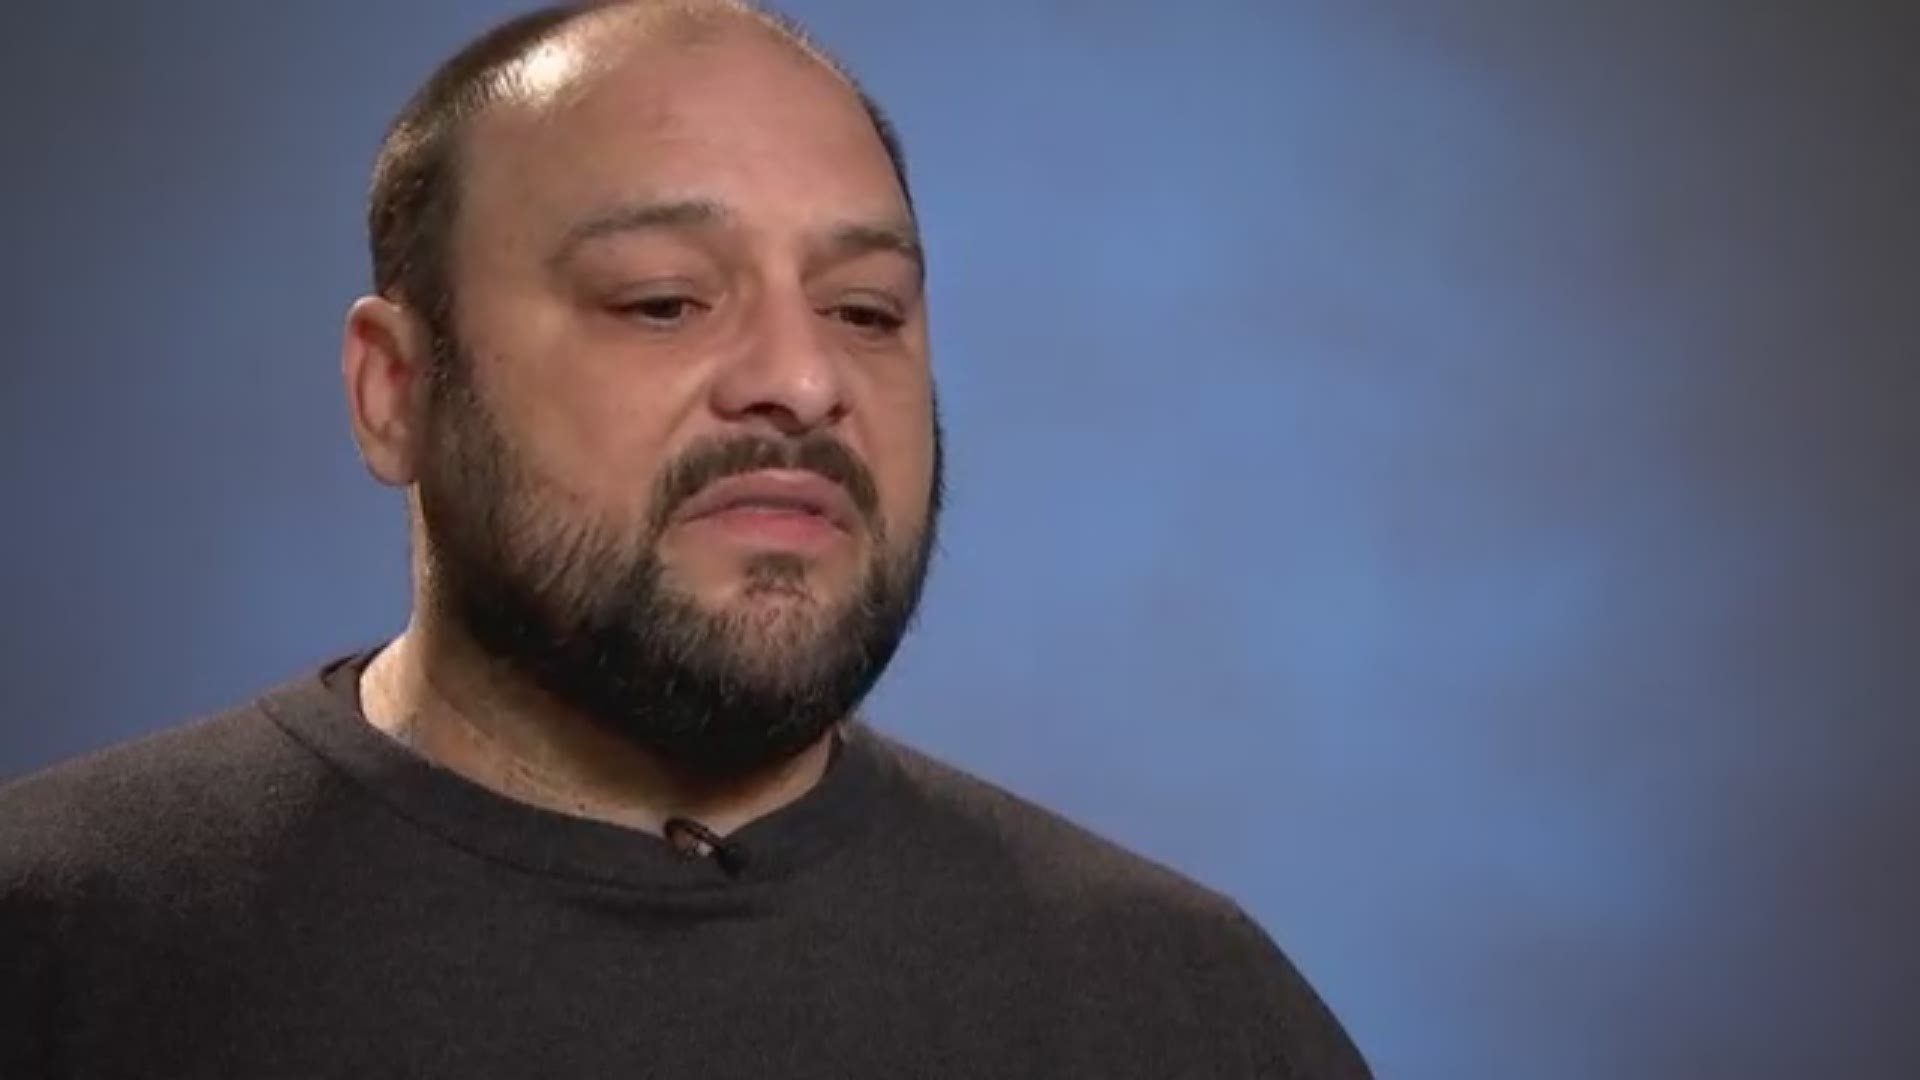 Christian Picciolini was a white supremacist who ran a record store in Chicago. He said meeting the people who claimed to hate helped him leave the movement.